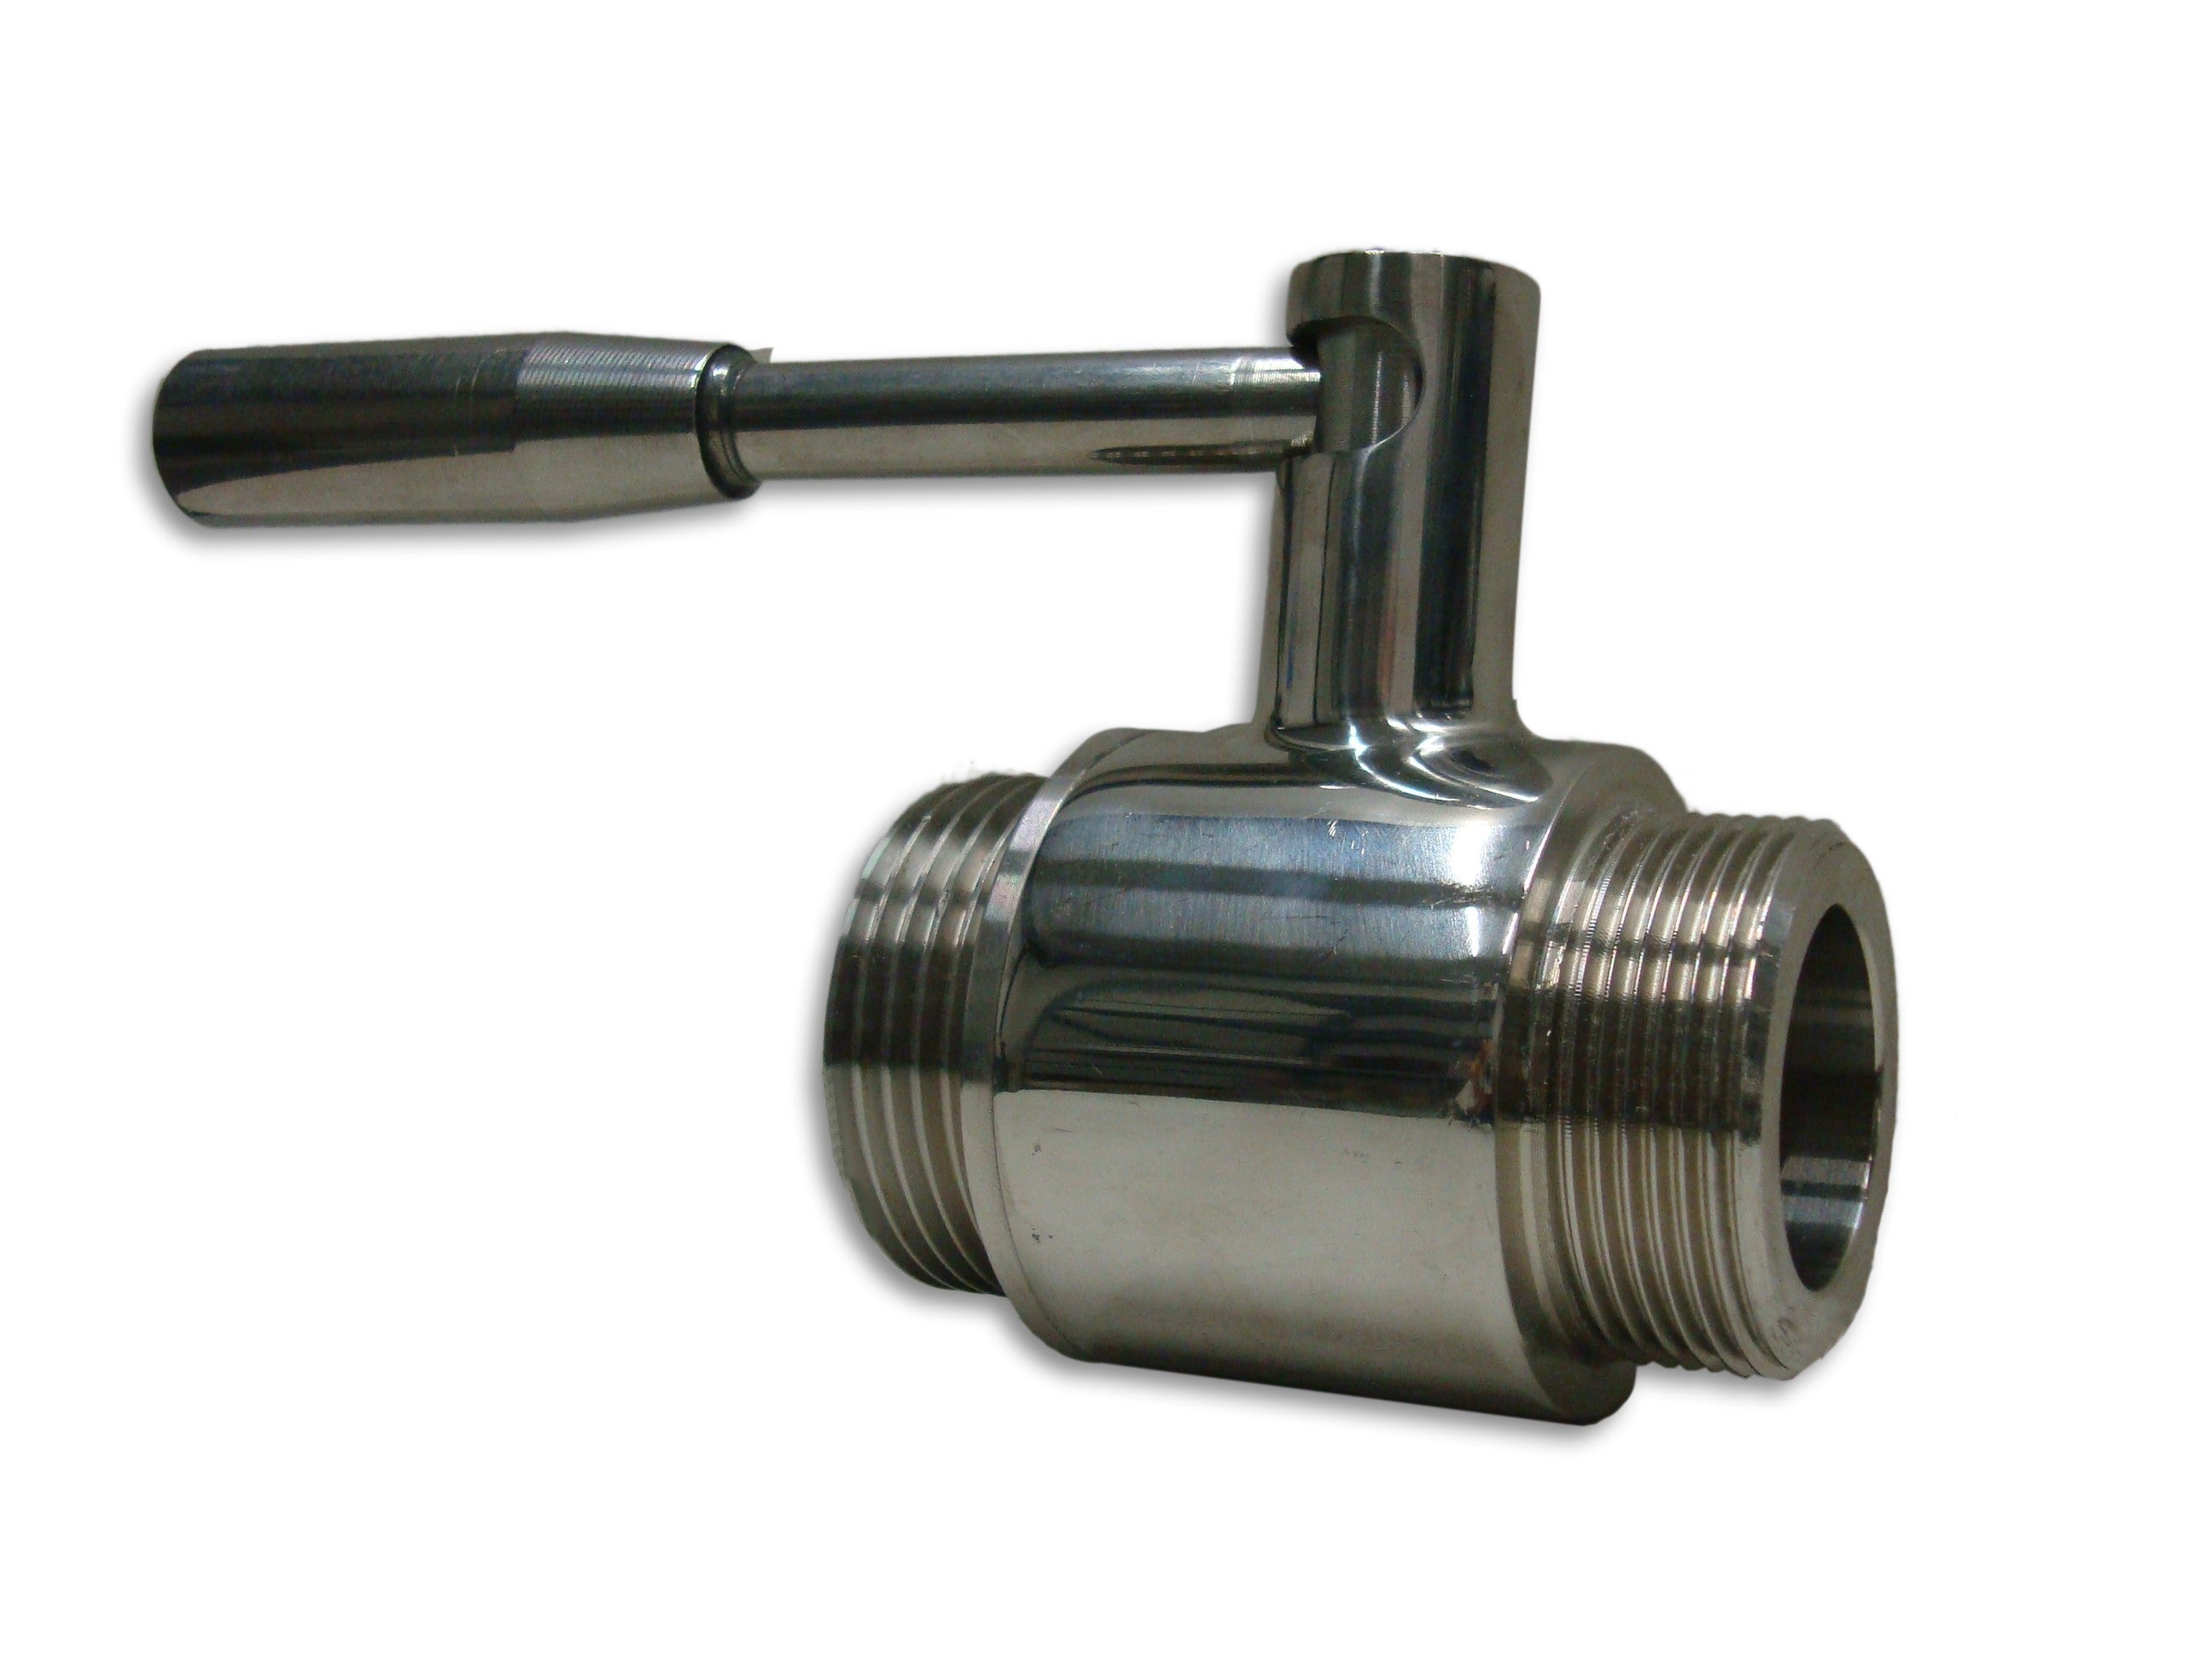 Stainless steel ball valve 1" with enological screw 30